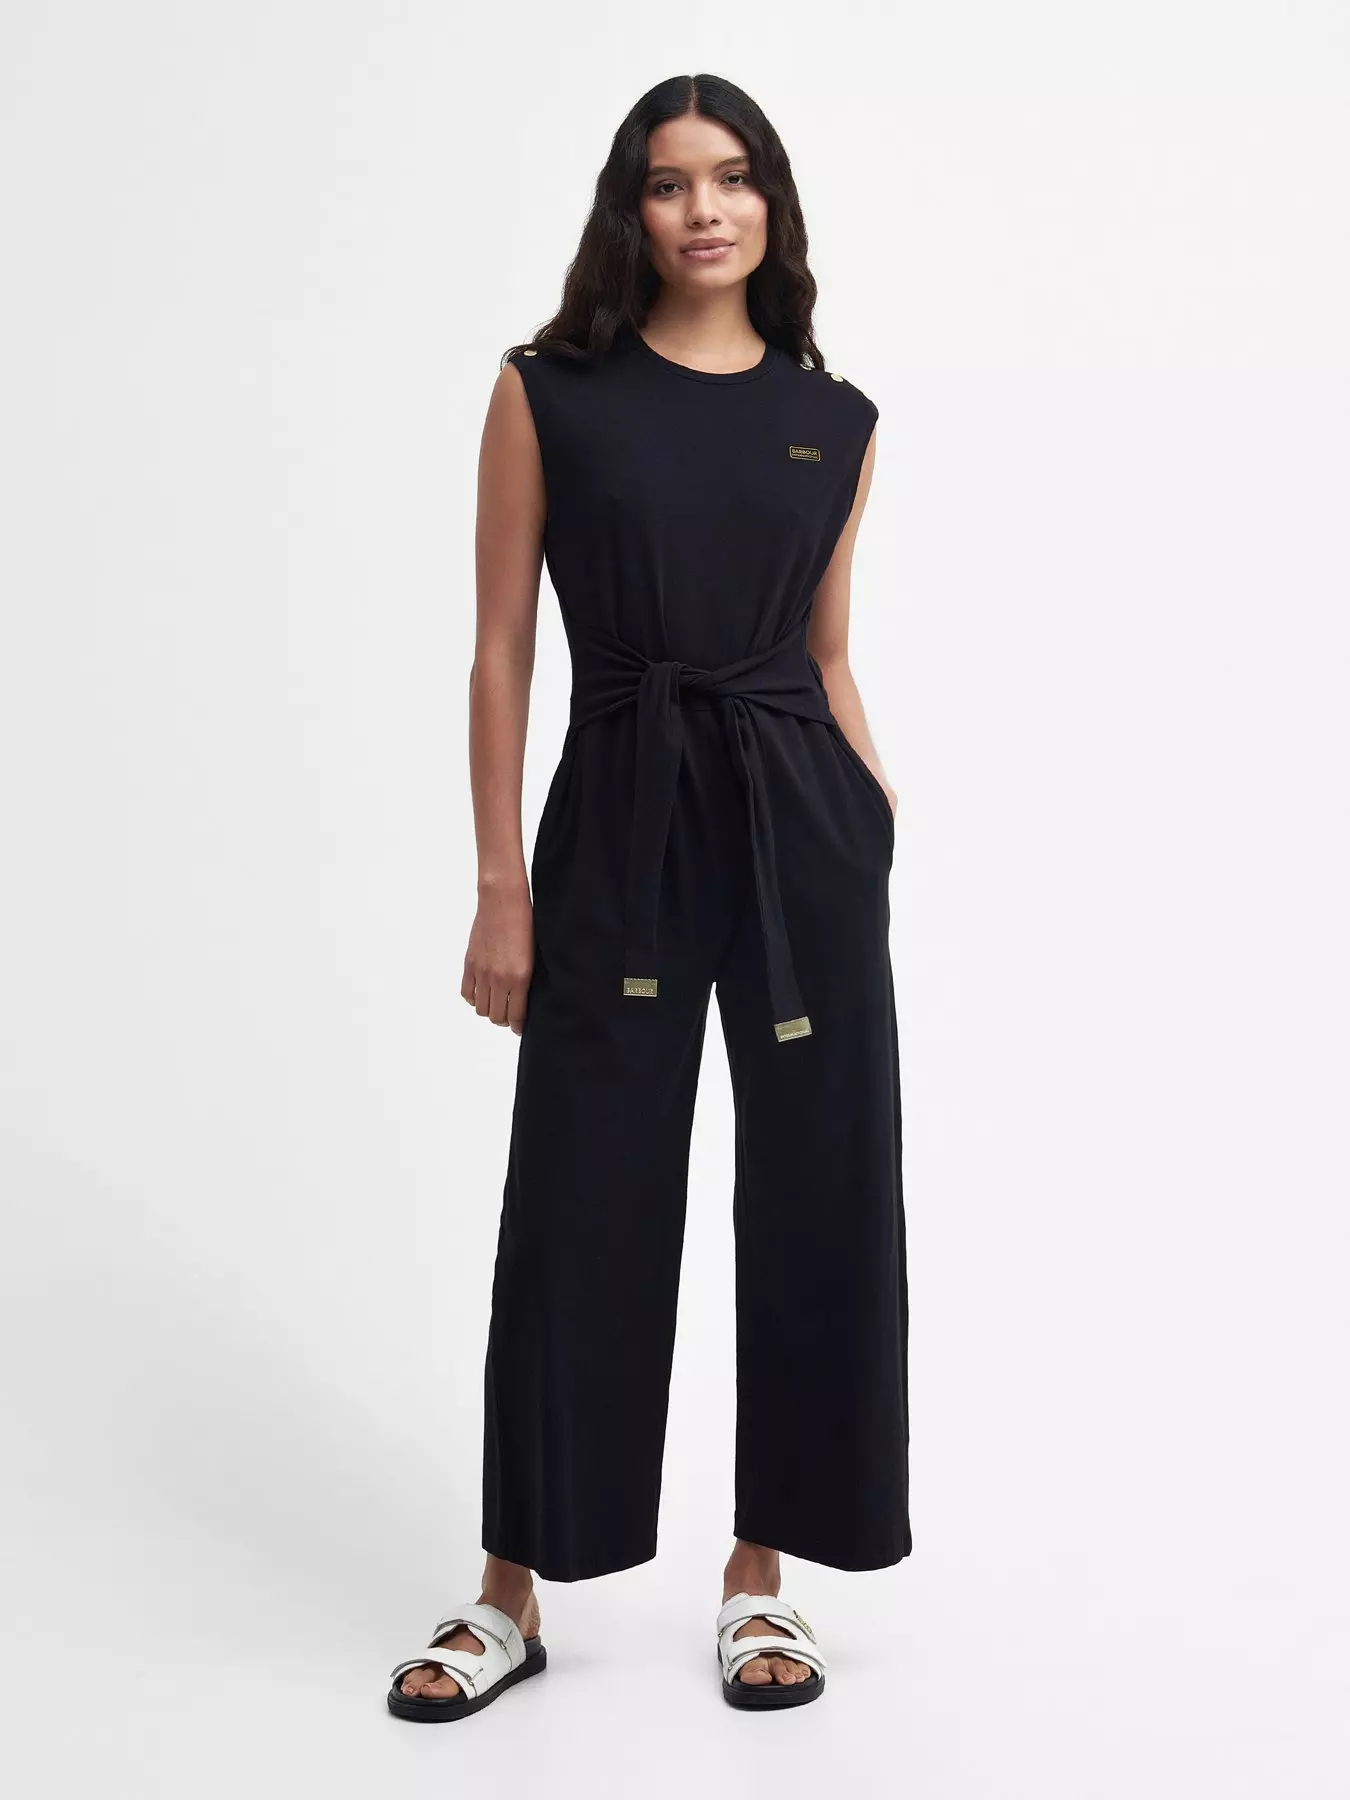 The Best Jumpsuits To Wear Your Next Girls Night Out - Society19 UK